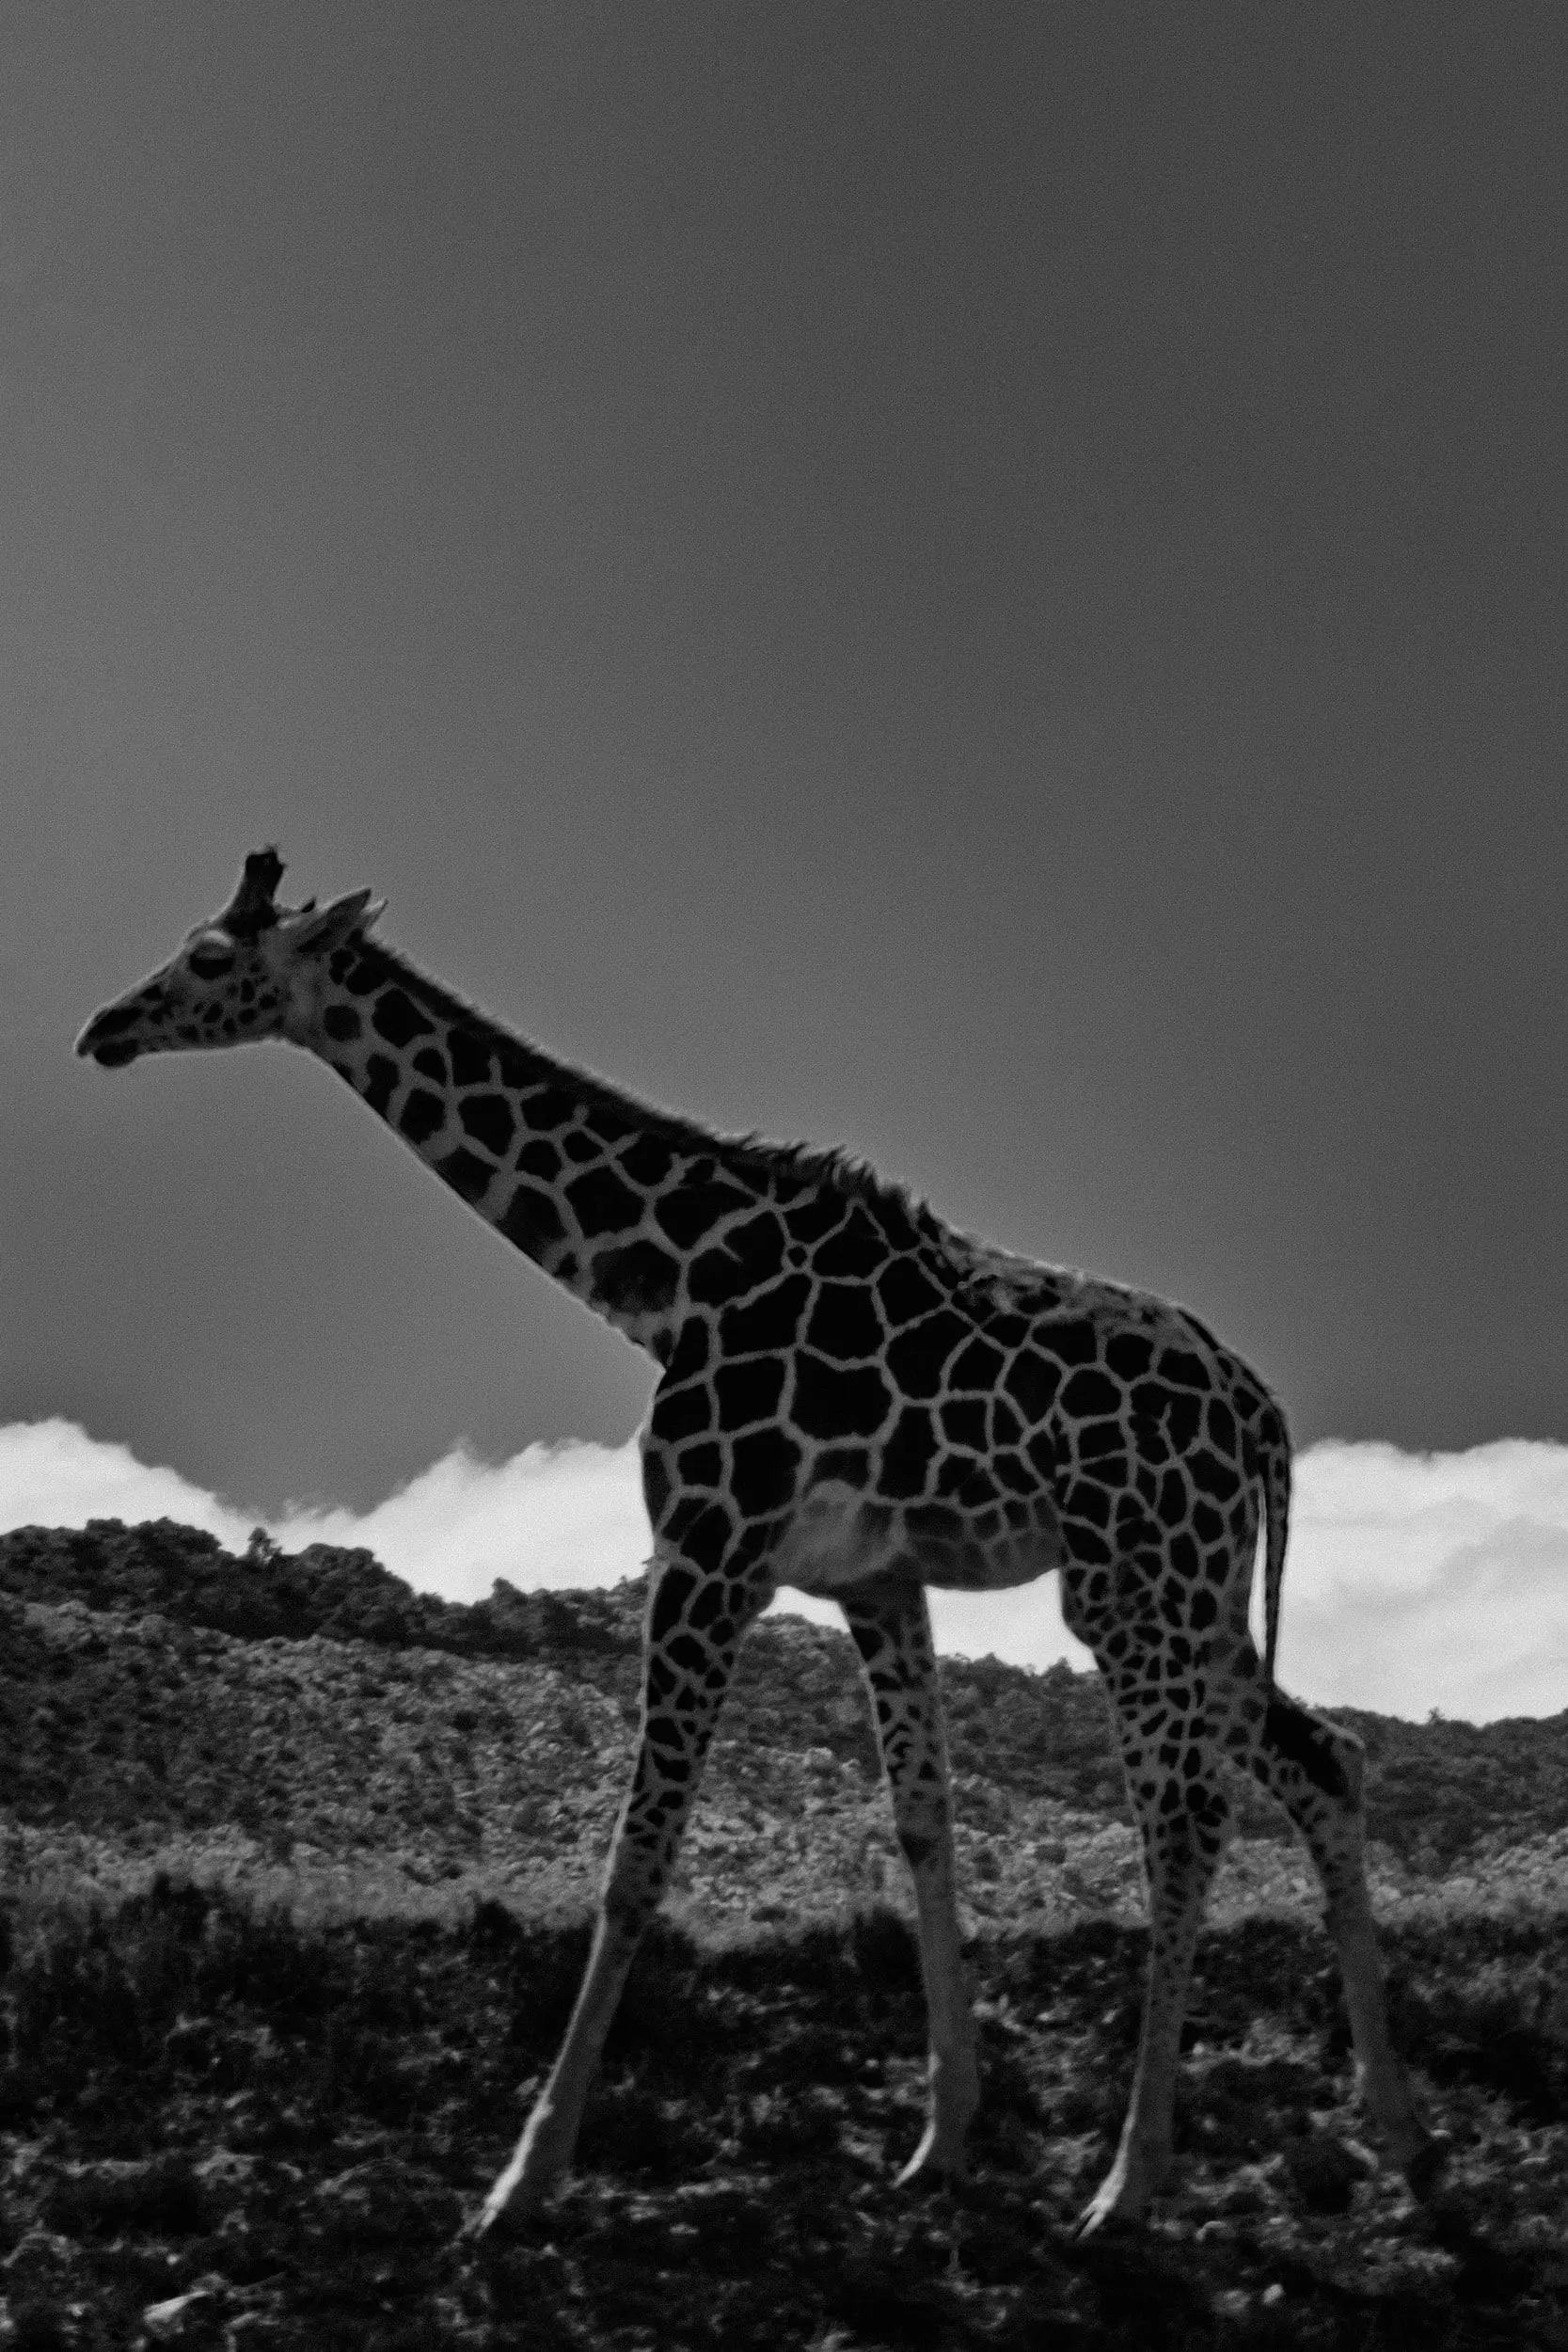 A giraffe walks on grass in front of fluffy white clouds. Black and white.